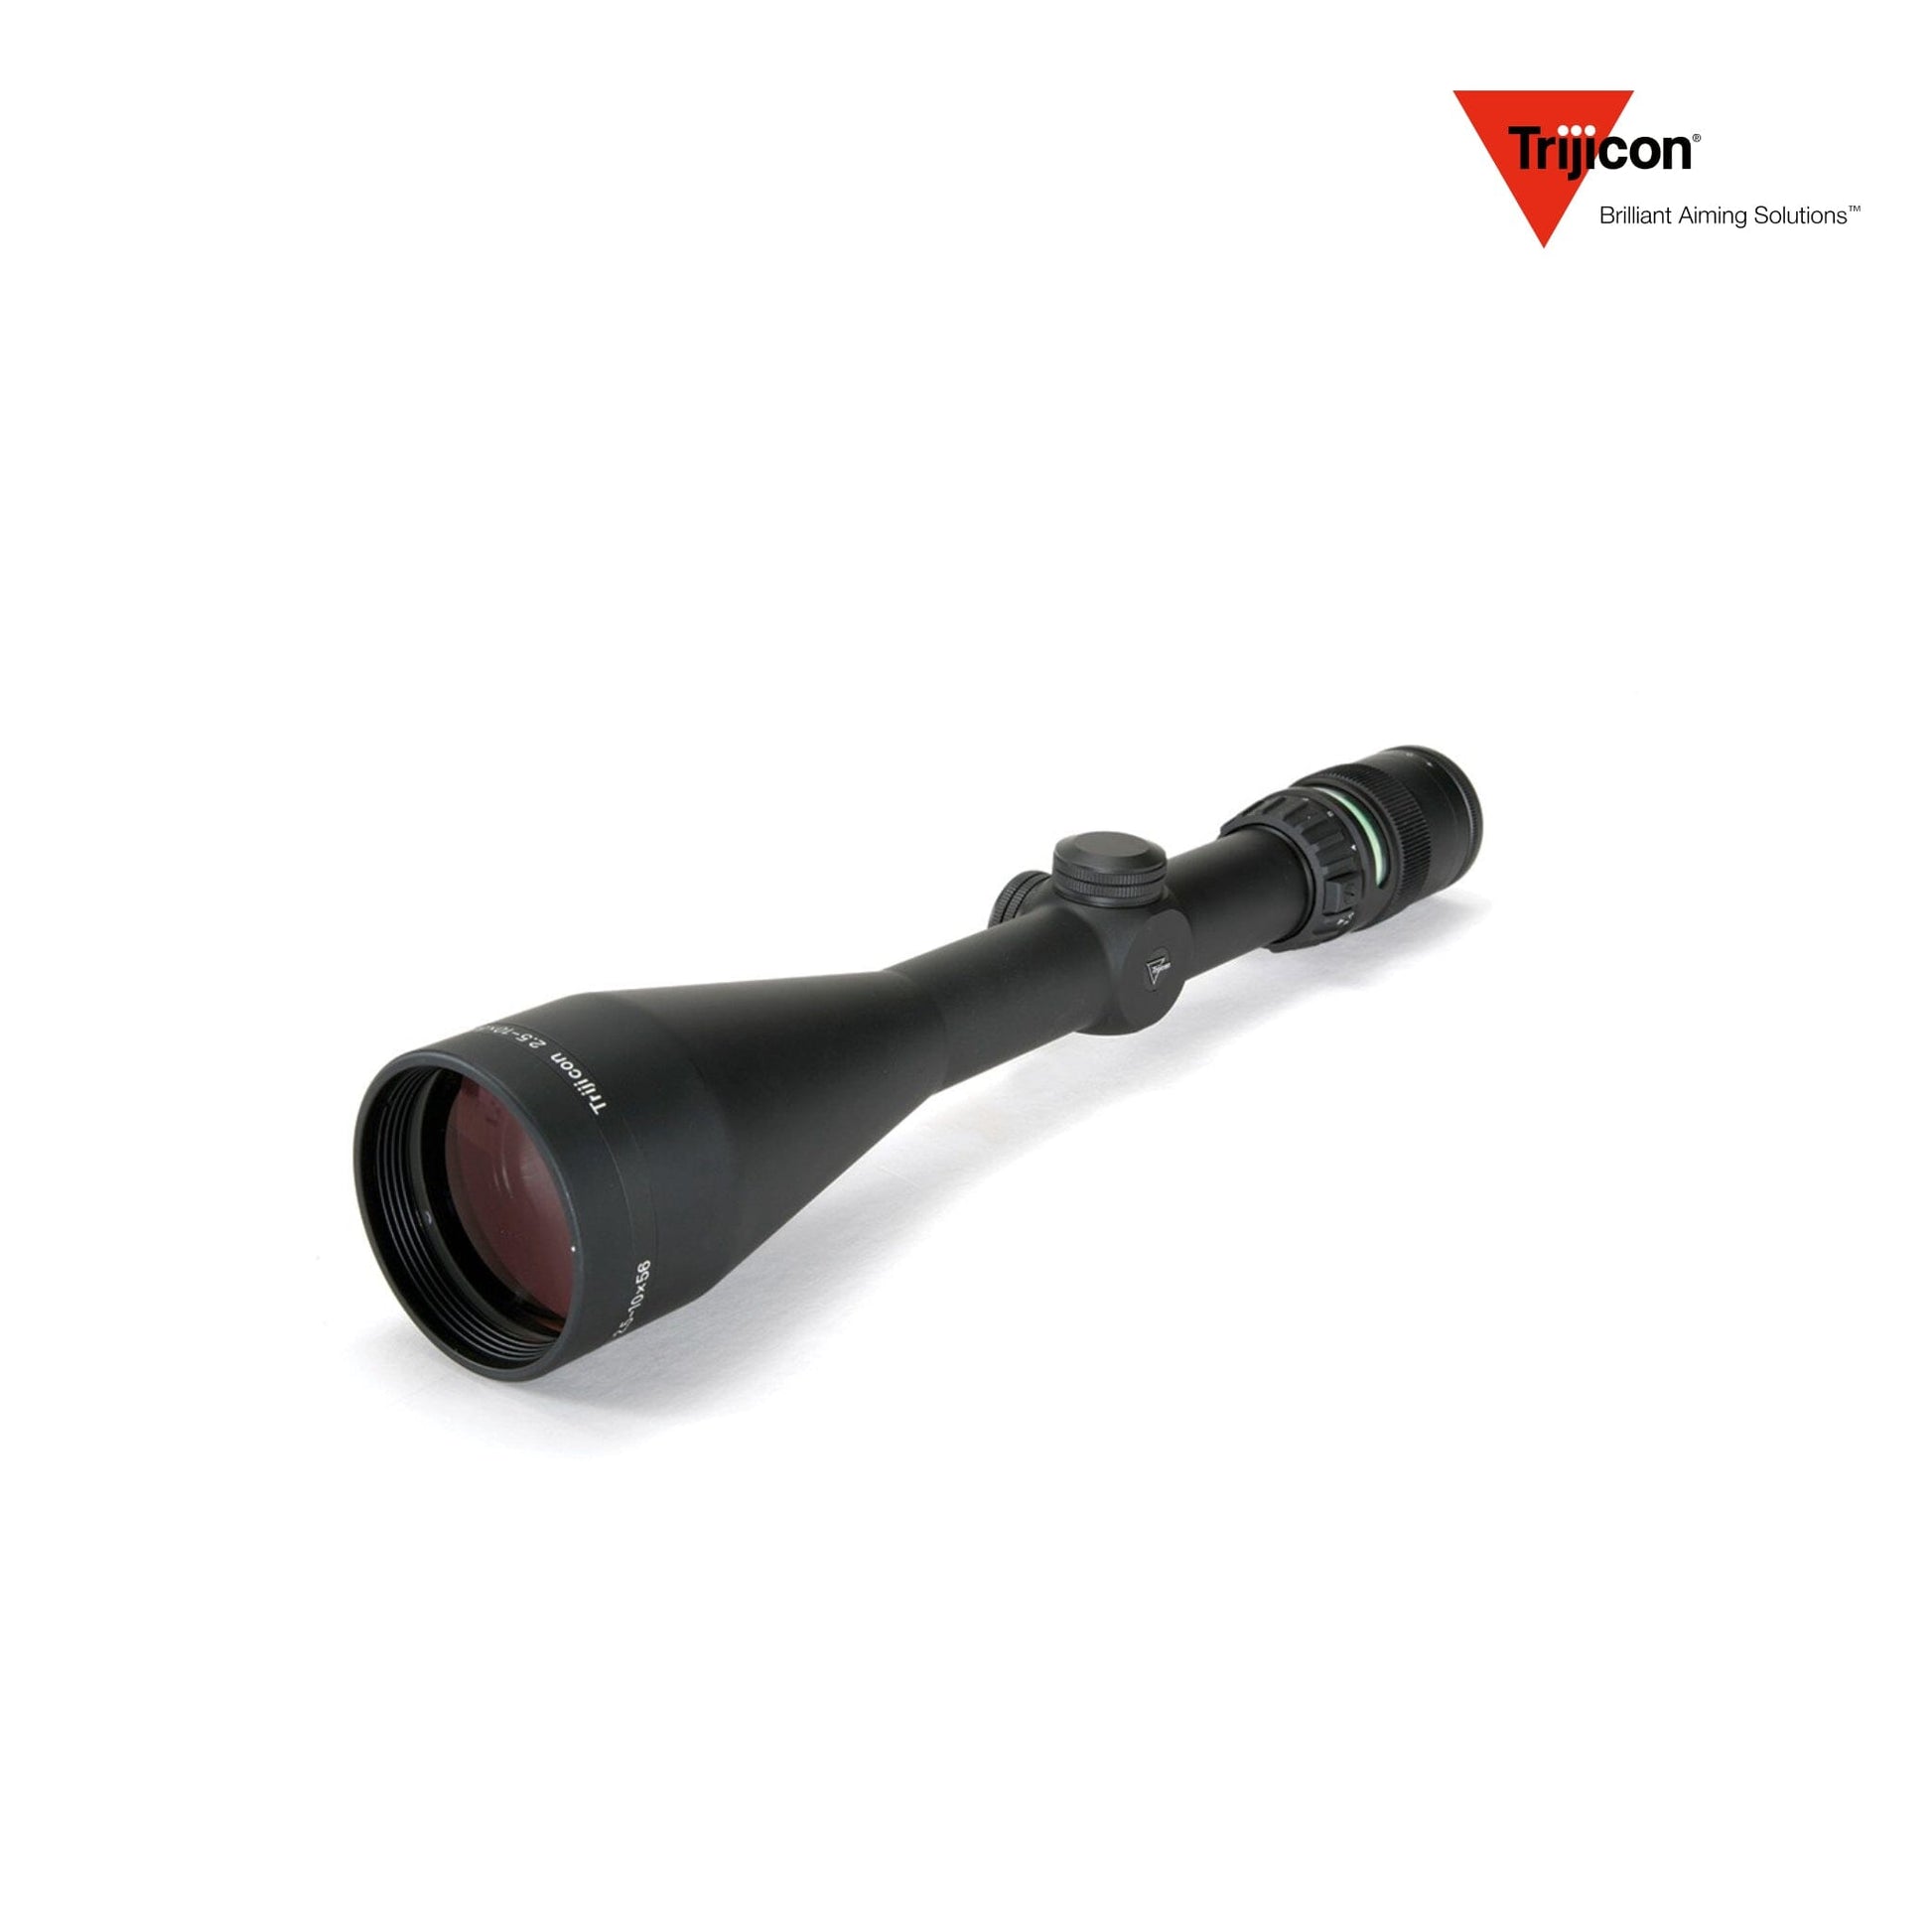 Trijicon AccuPoint 2.5-10x56 Rifle Scope MIL-Dot Crosshair with Green Dot Reticle TR22-2G Rifle Scope Trijicon 